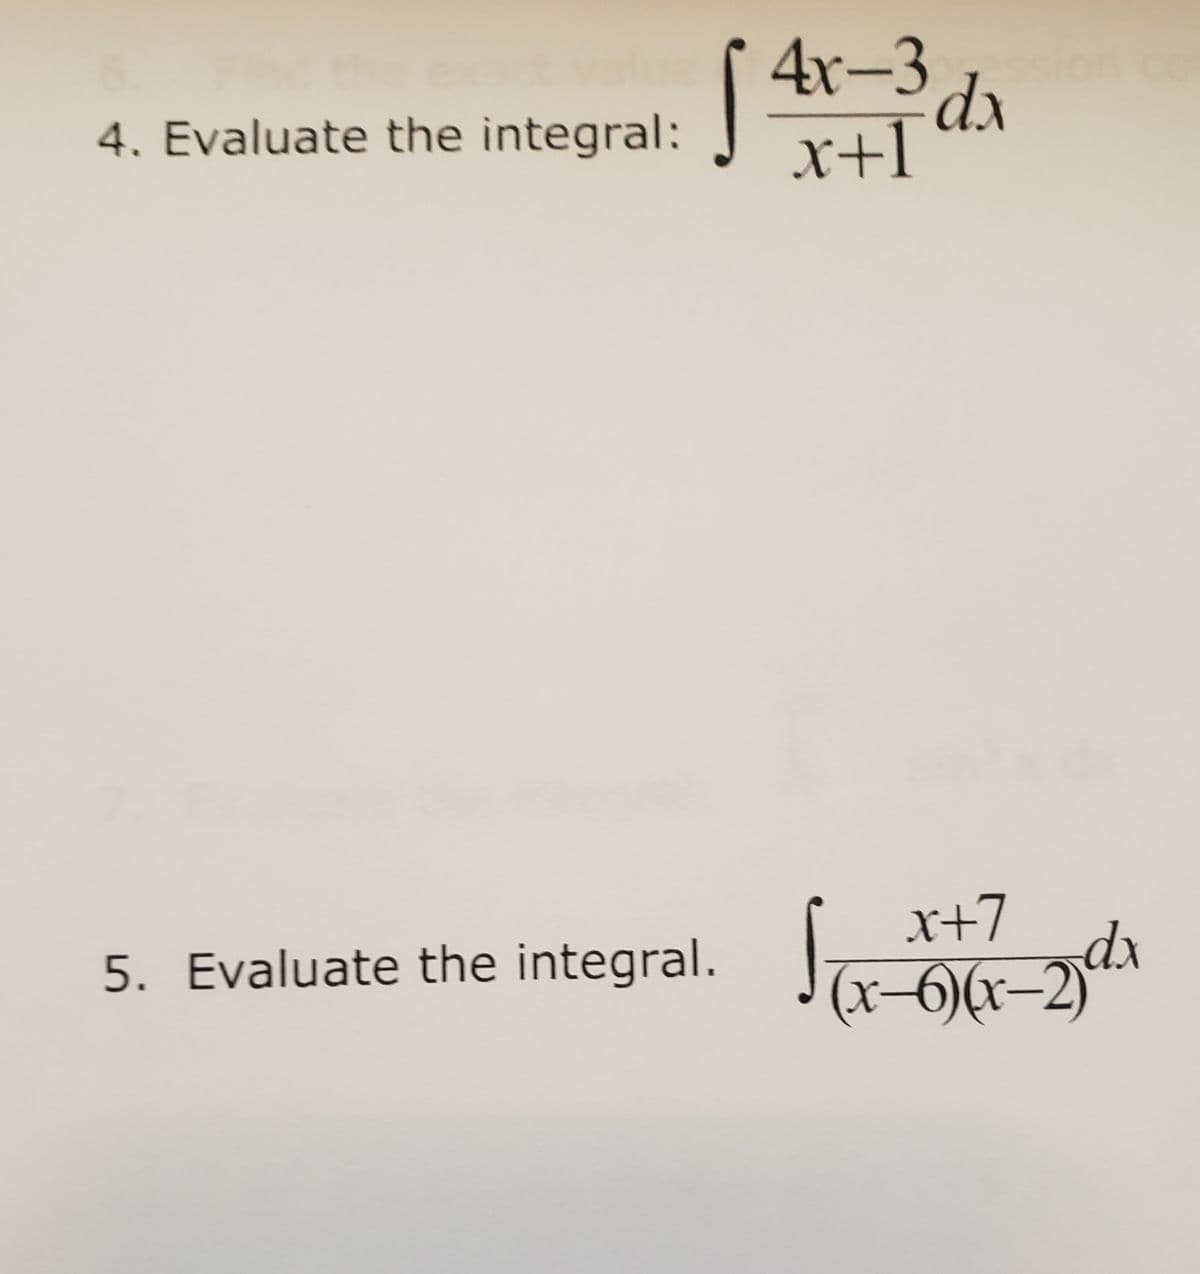 S4r-3
4. Evaluate the integral:
x+l
x+7
5. Evaluate the integral.
(x-6)(x–2
